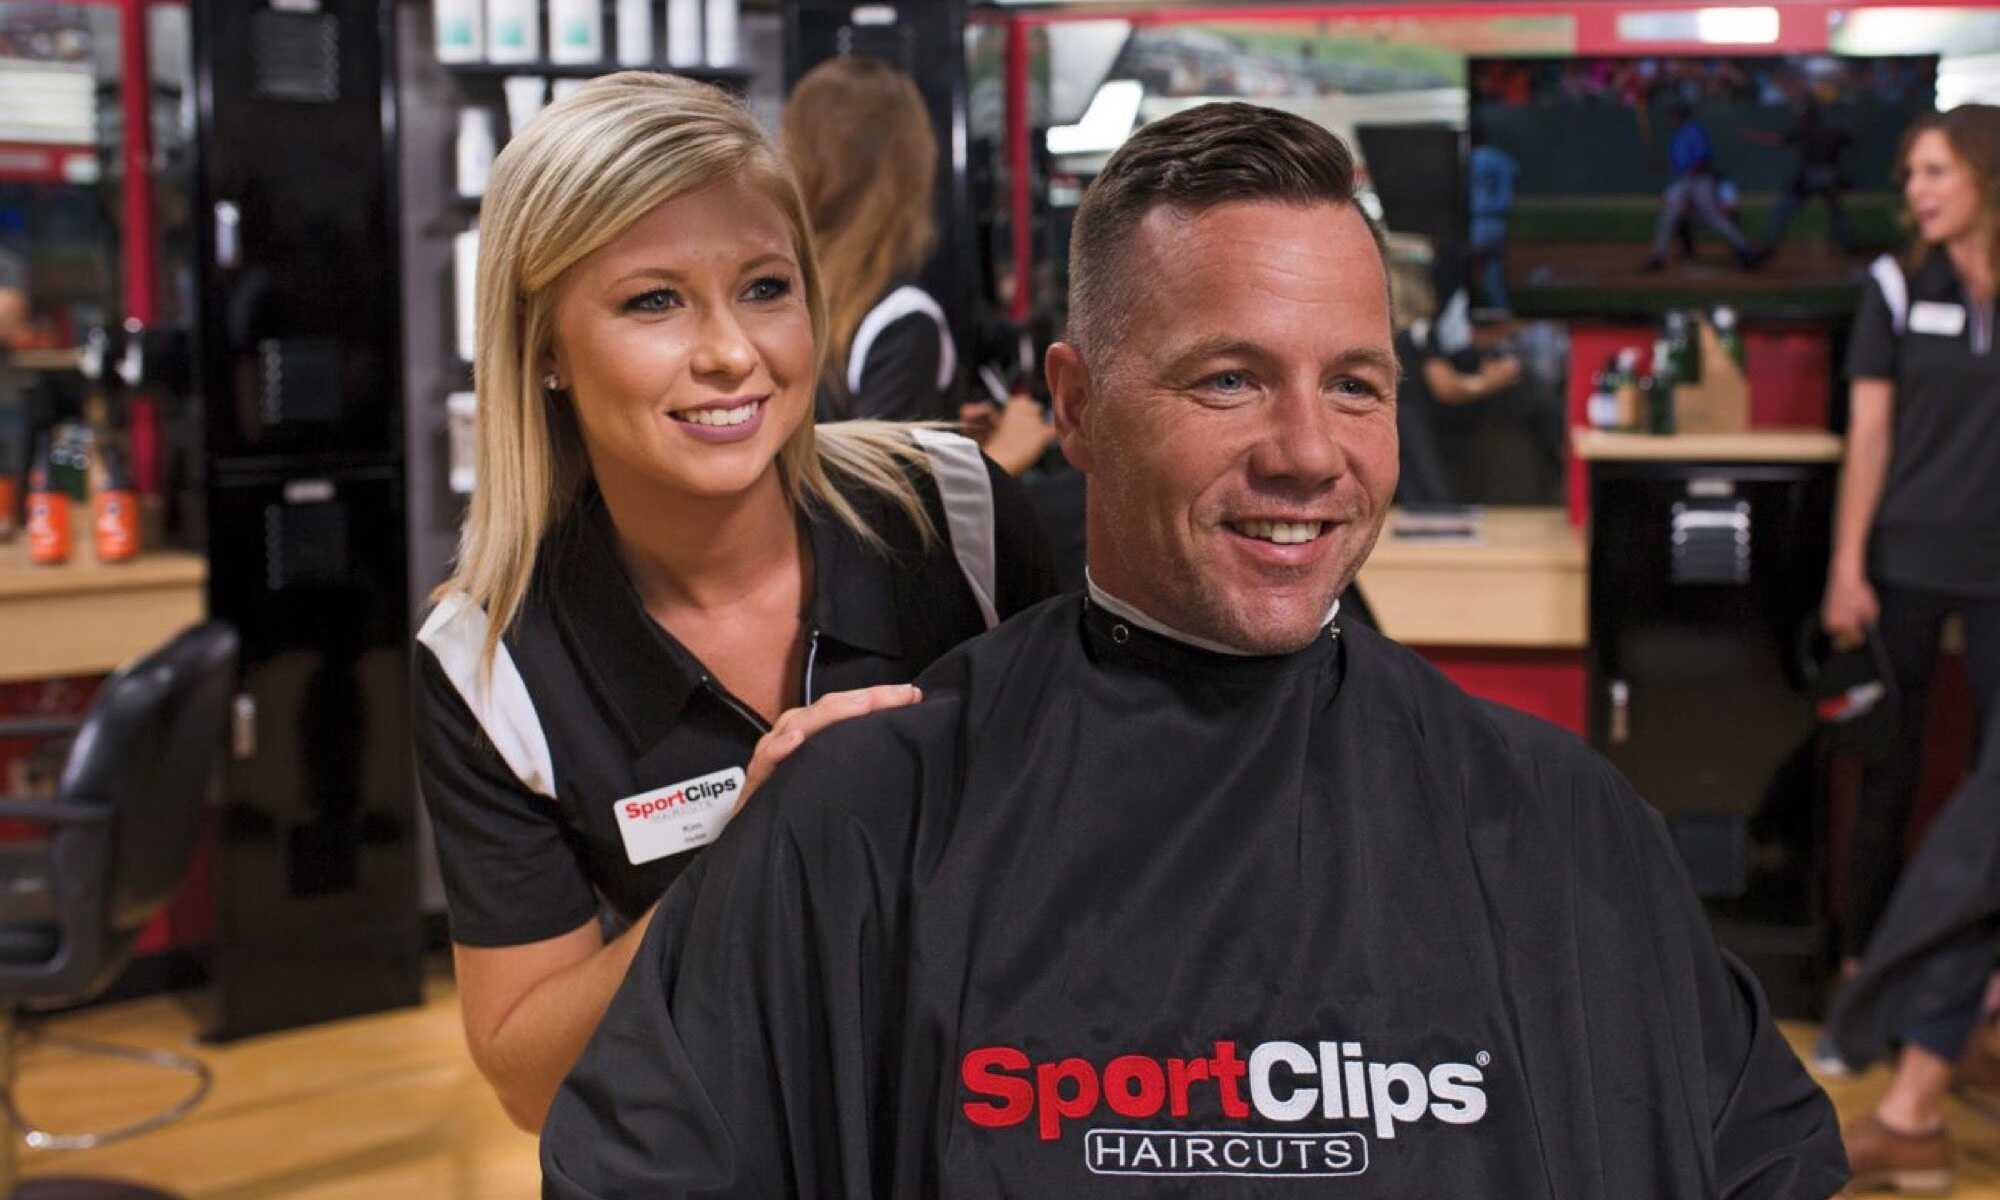 Professional barber at Sports Clips providing a haircut to a male customer